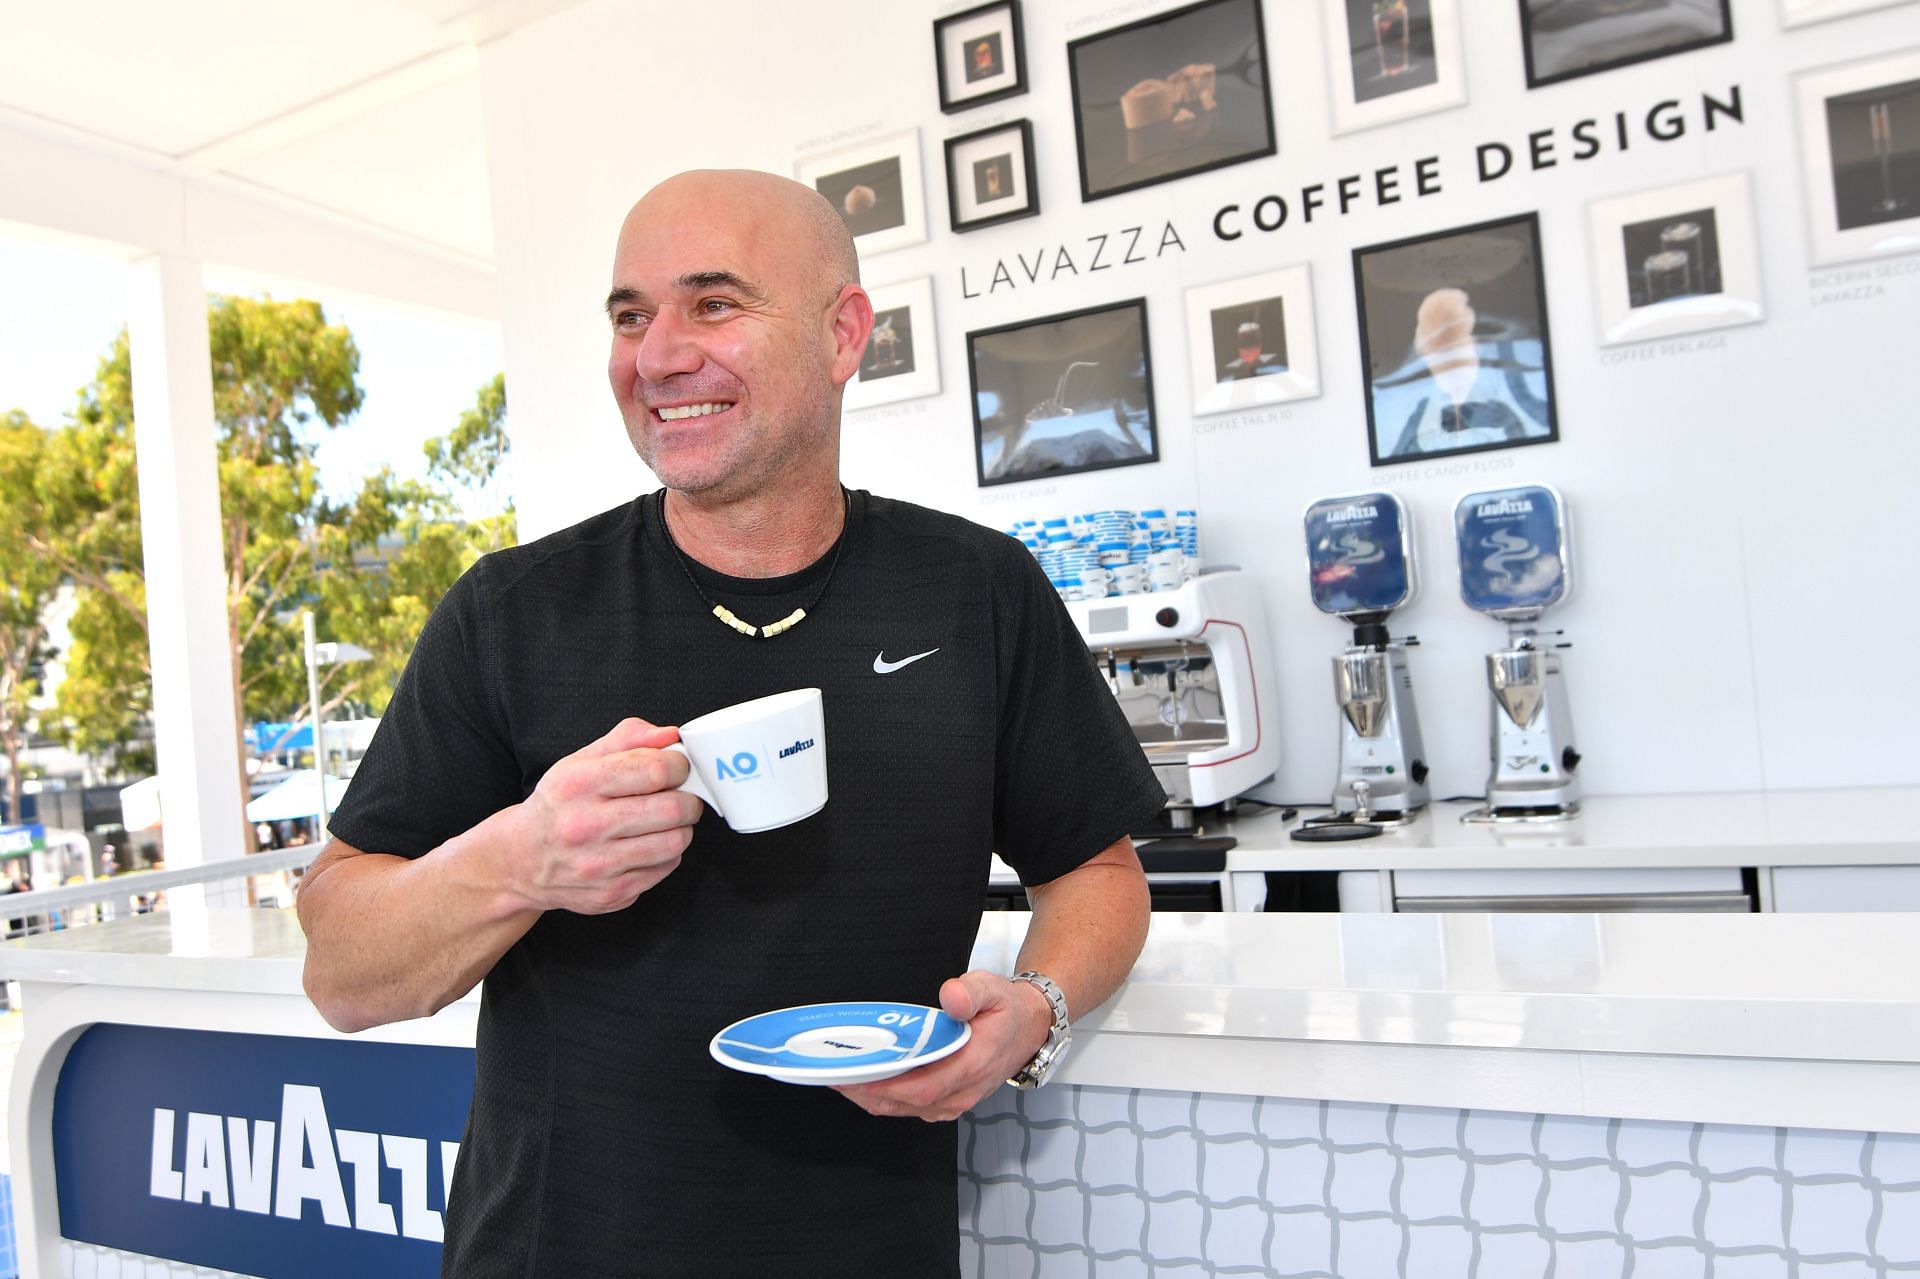 Agassi poses at the 2018 Australian Open at Melbourne Park in Australia - Getty Images